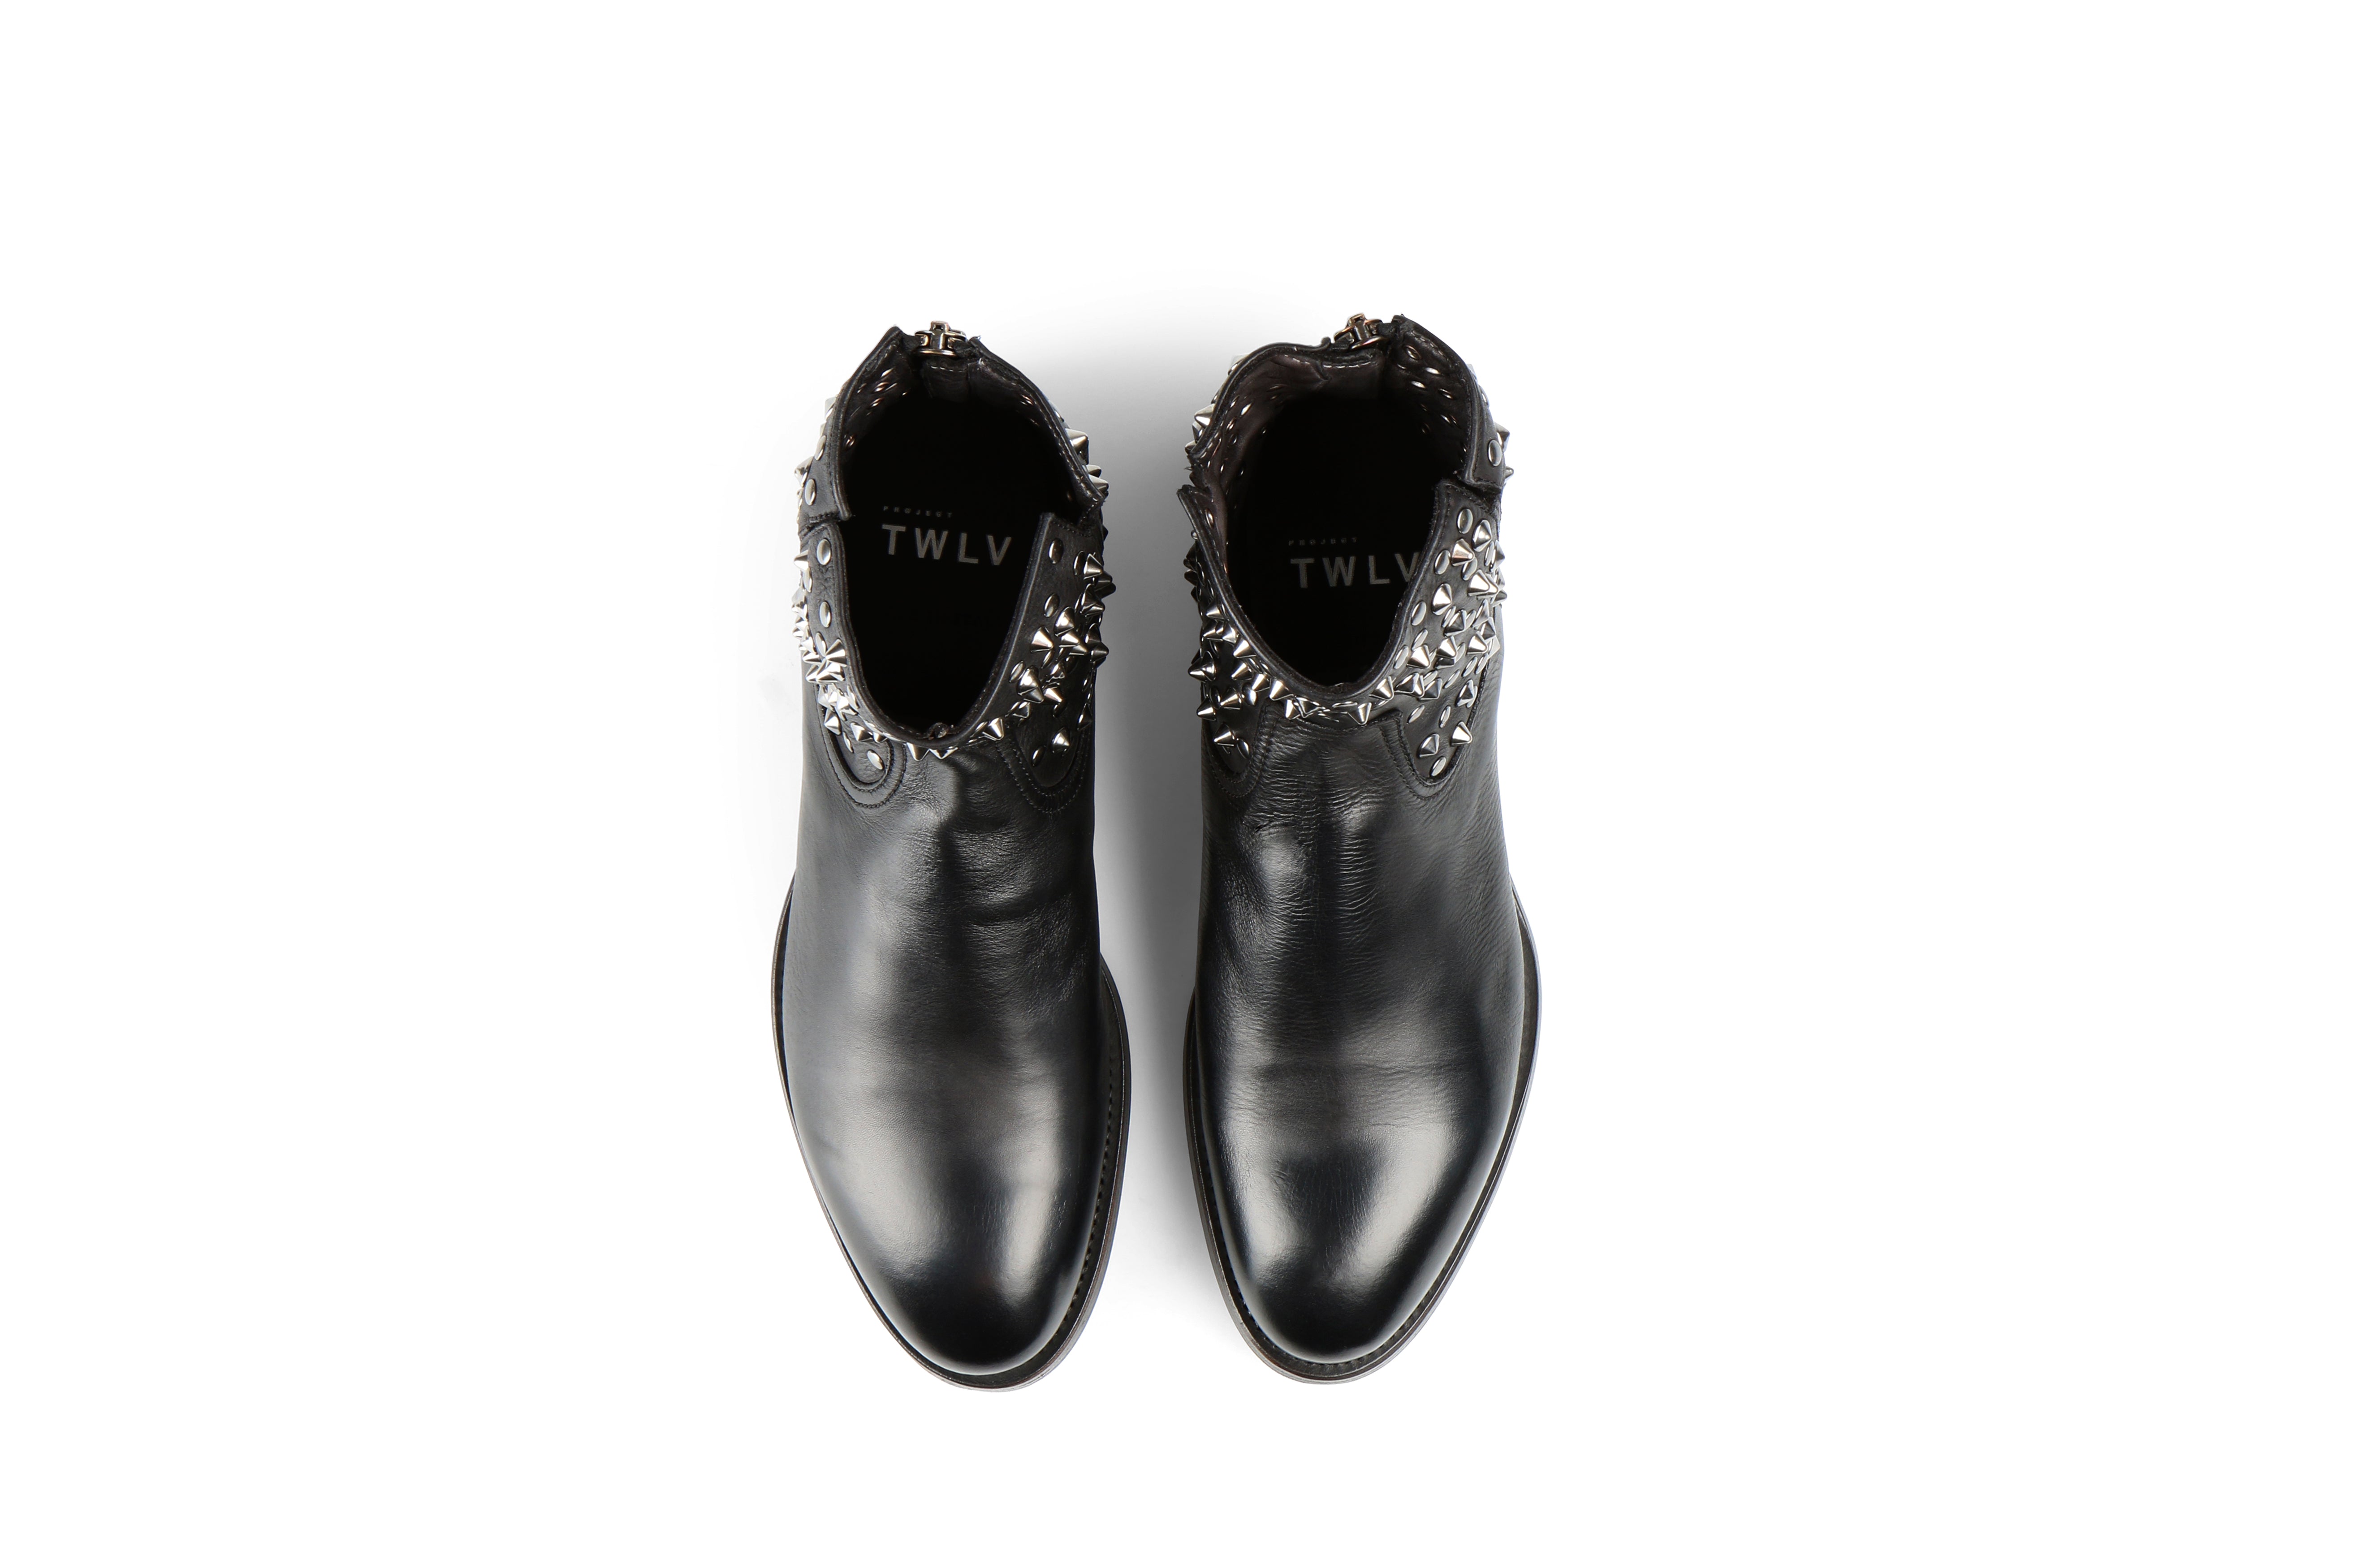 Flame Studs 2 Black Washed Calf Leather Zipper Boots